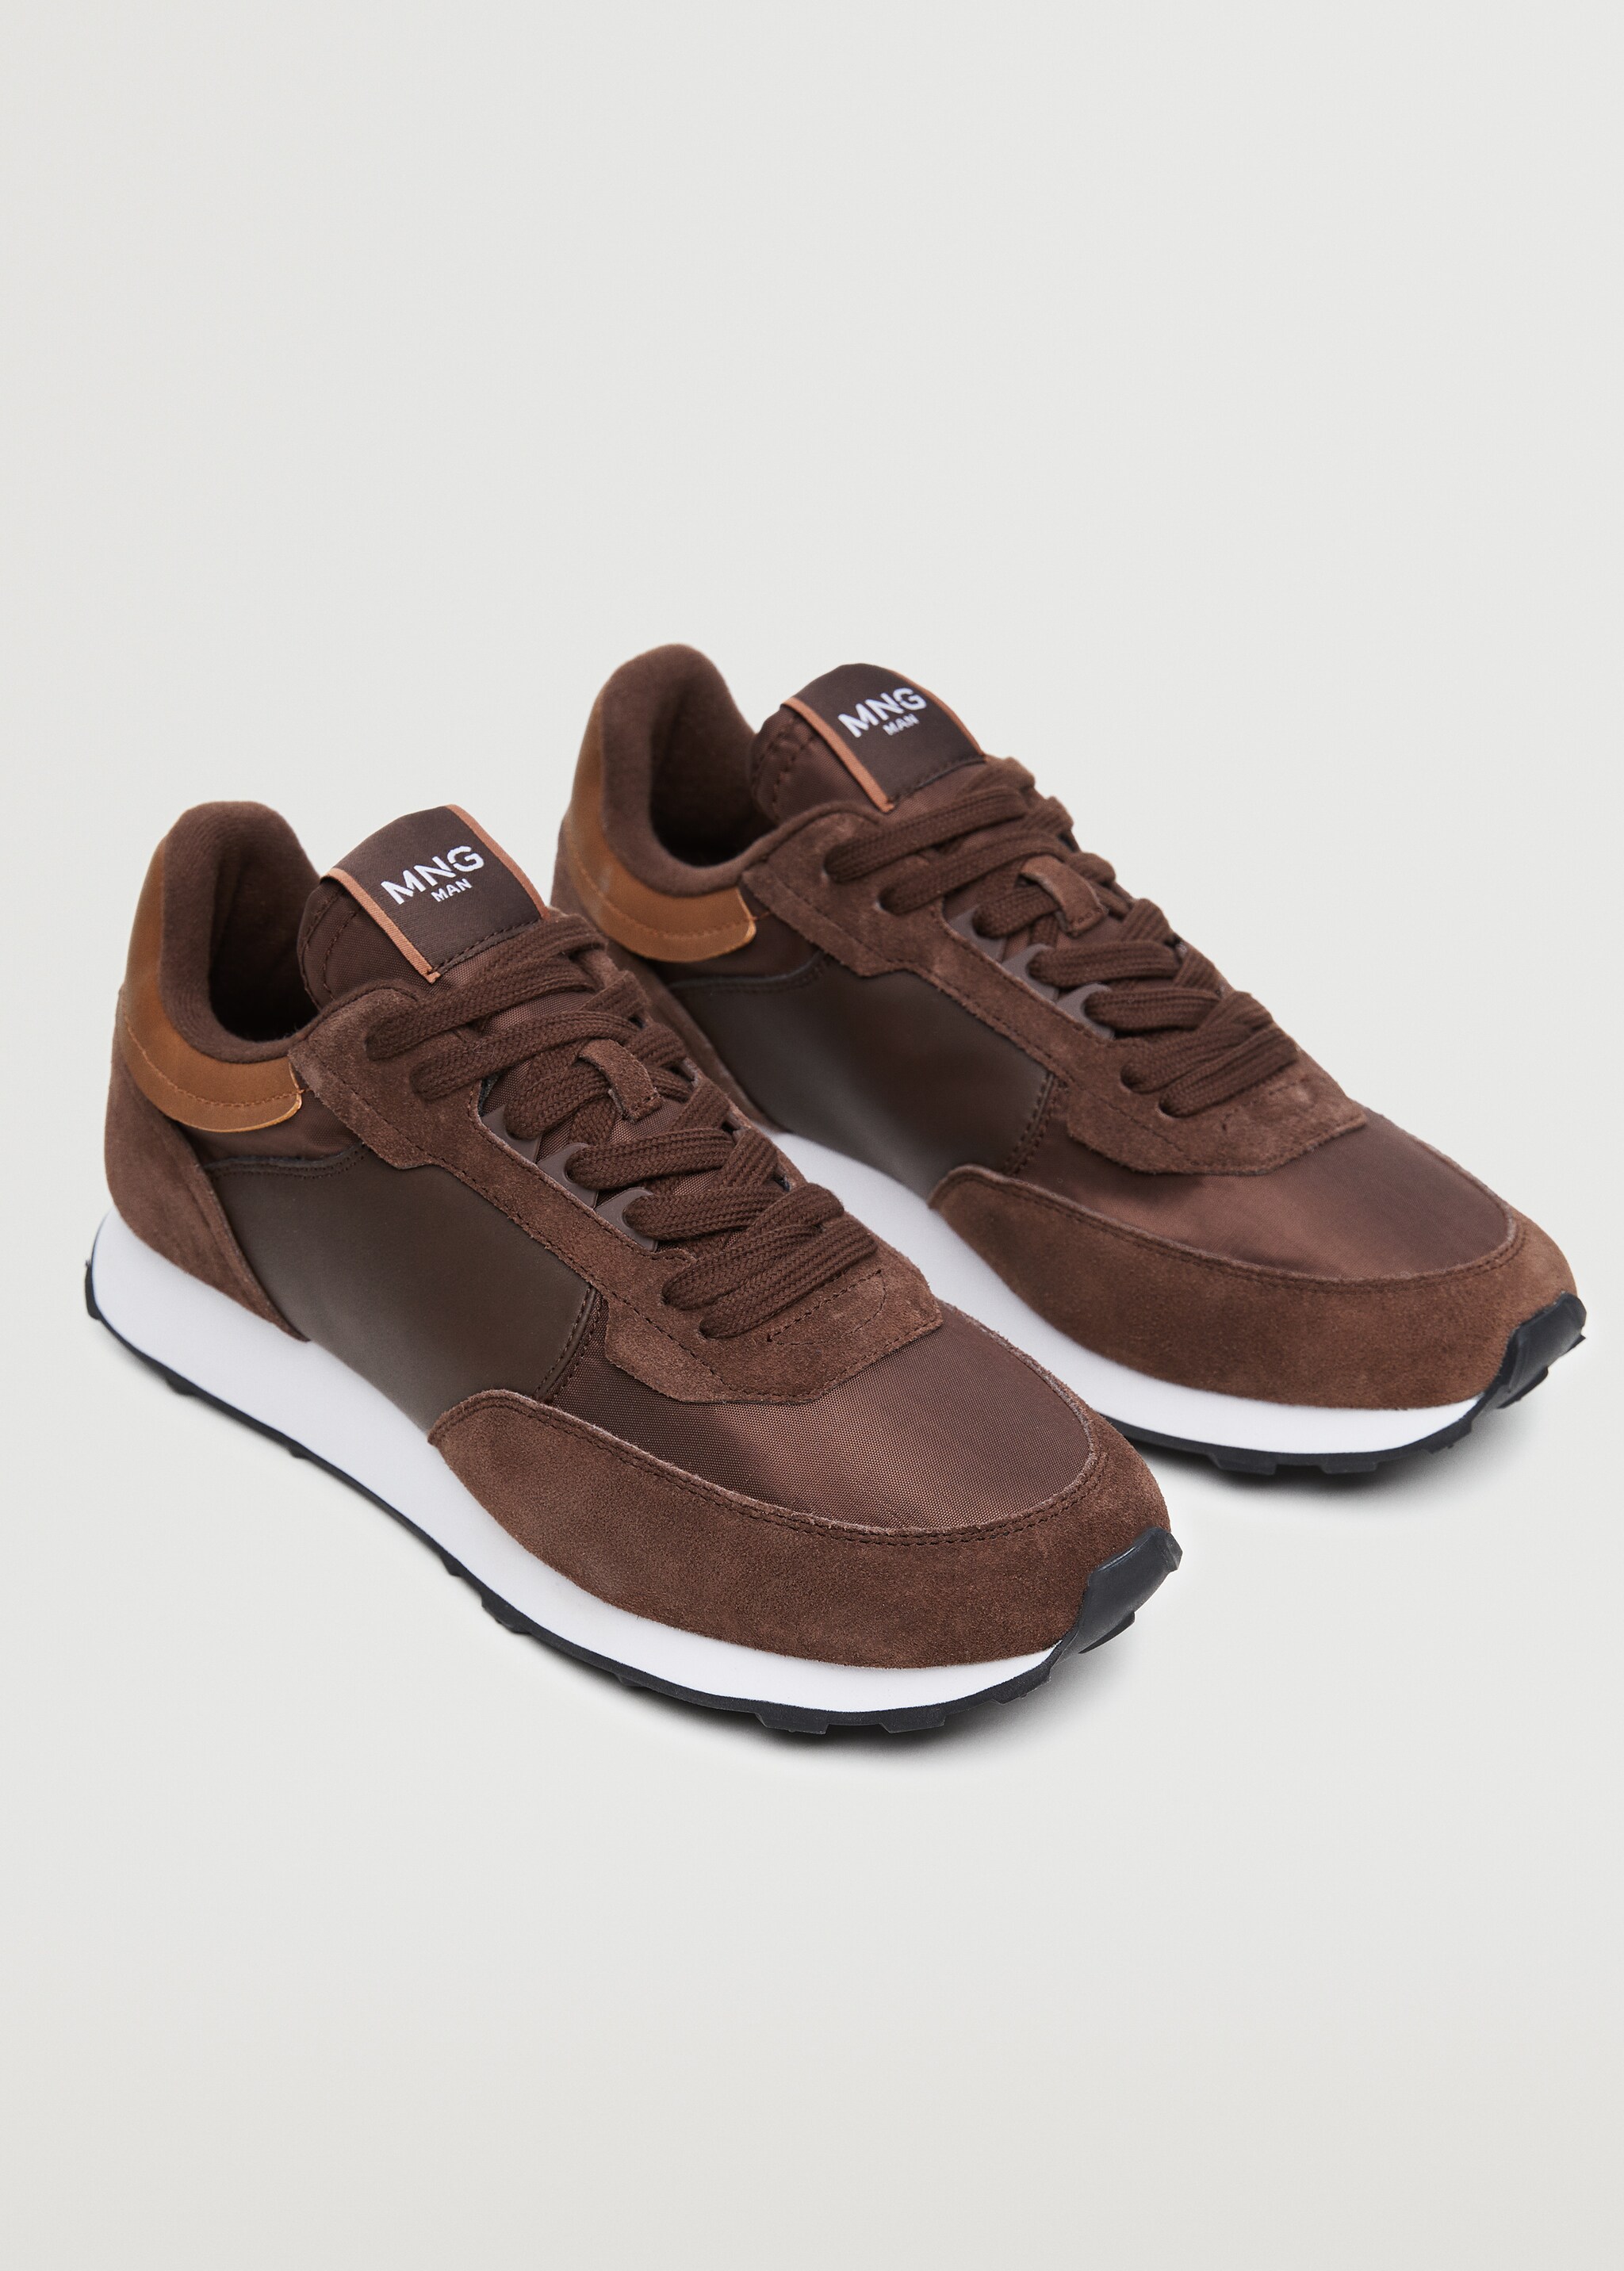 Combined leather sneakers - Medium plane